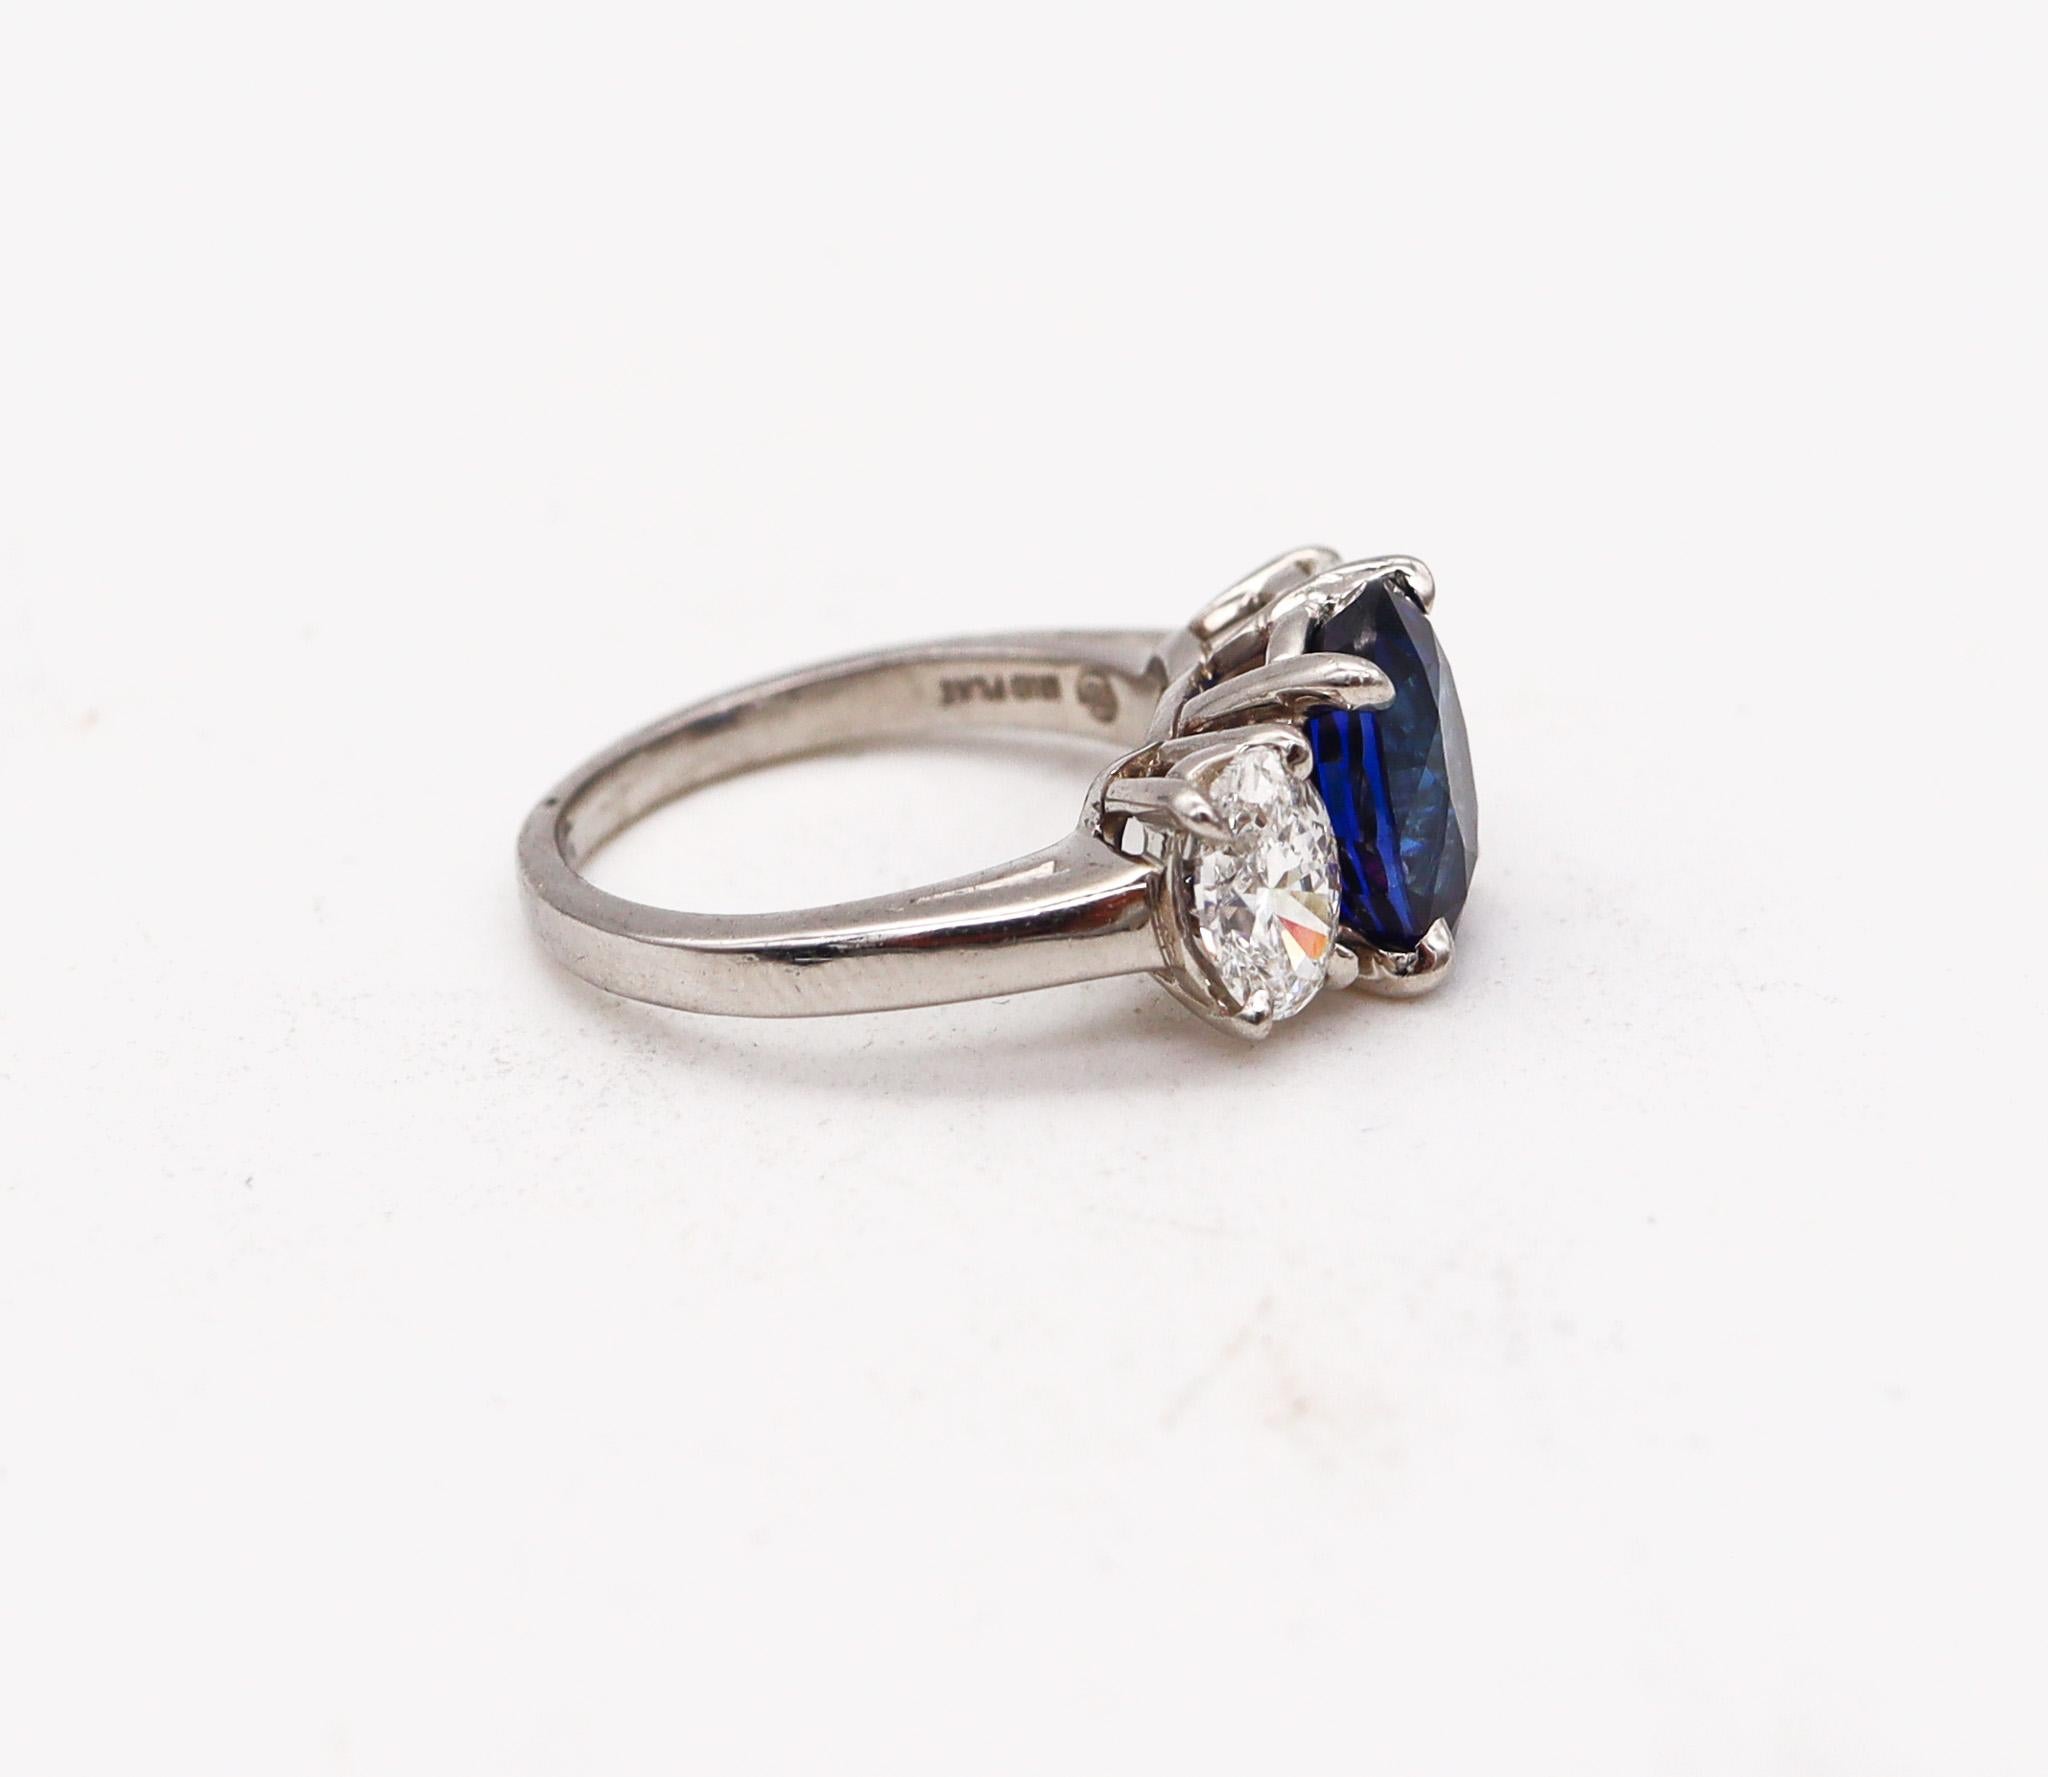 Contemporary Oscar Heyman Certified Ring in Platinum with 4.0ctw in Sapphire and Diamonds